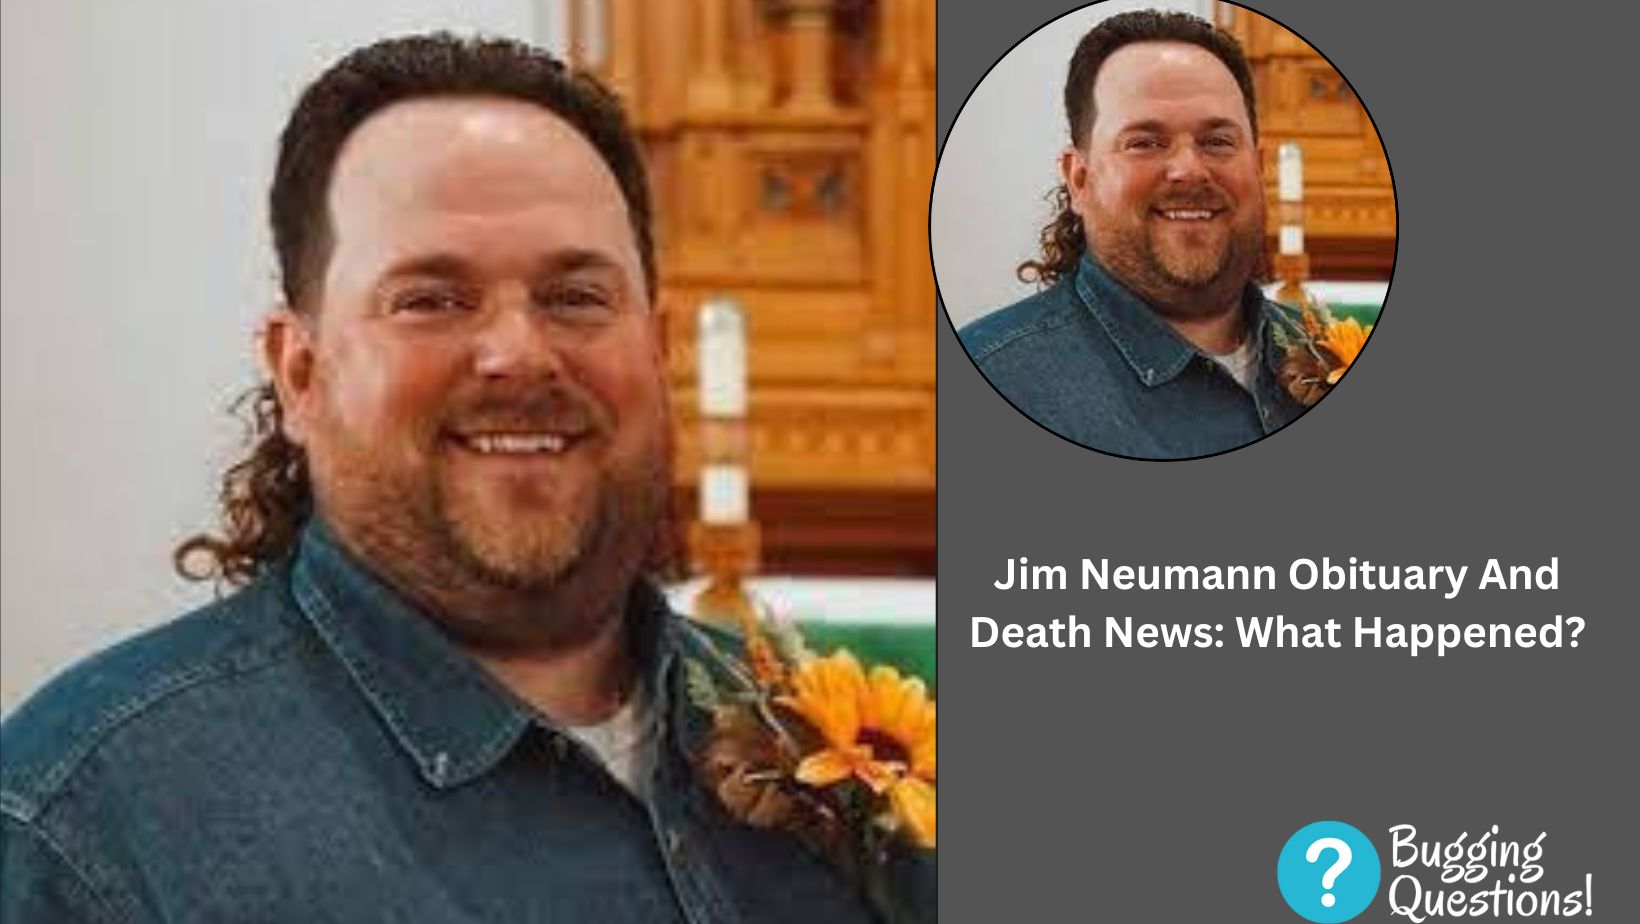 Jim Neumann Obituary And Death News: What Happened?